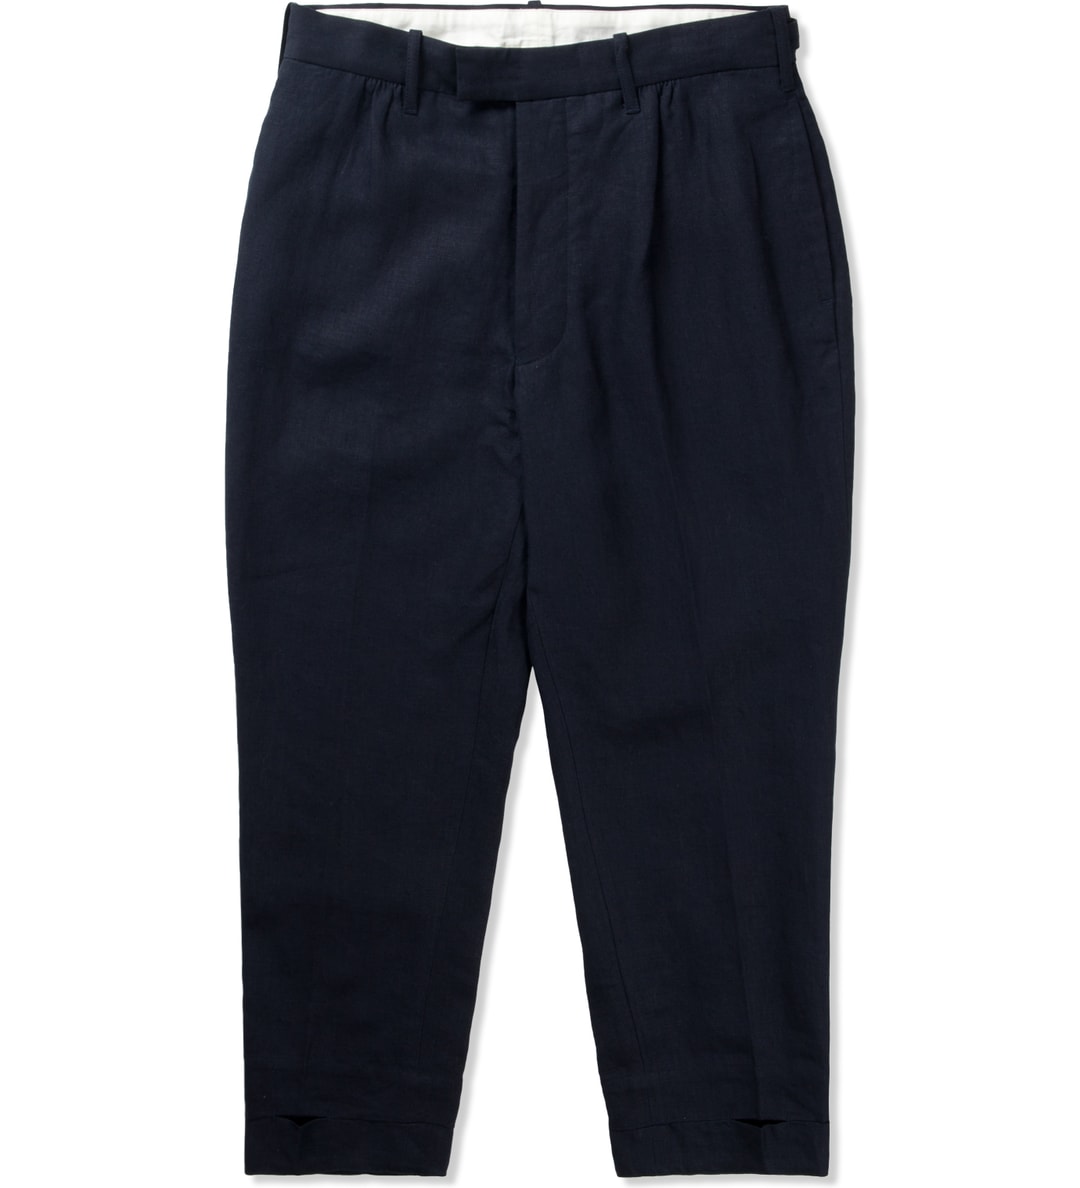 salvy - Blue SV04-0714A Pant | HBX - Globally Curated Fashion and ...